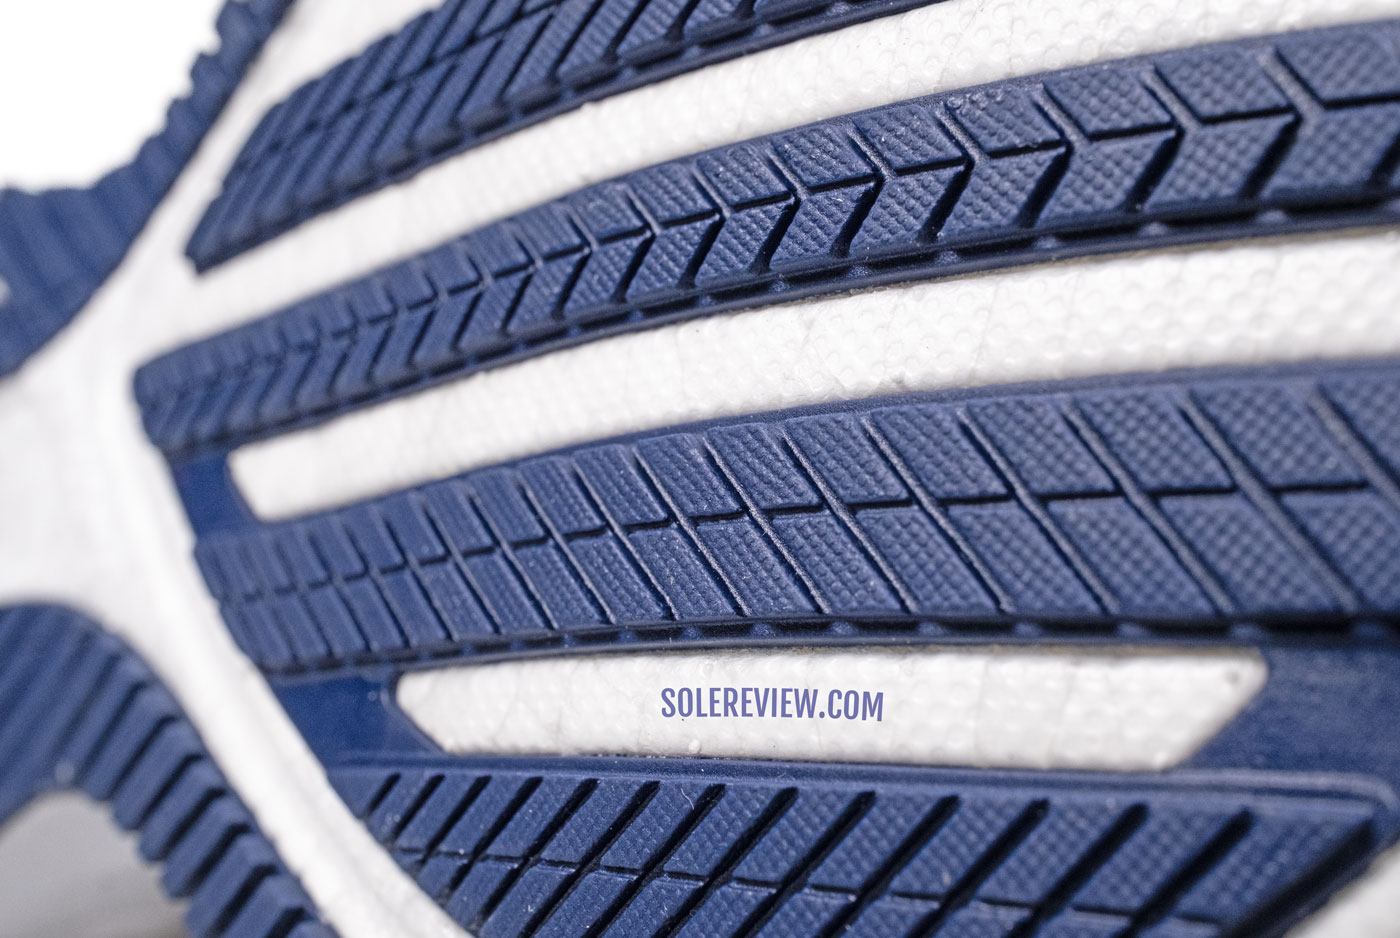 The forefoot outsole of the Saucony Triumph 20.